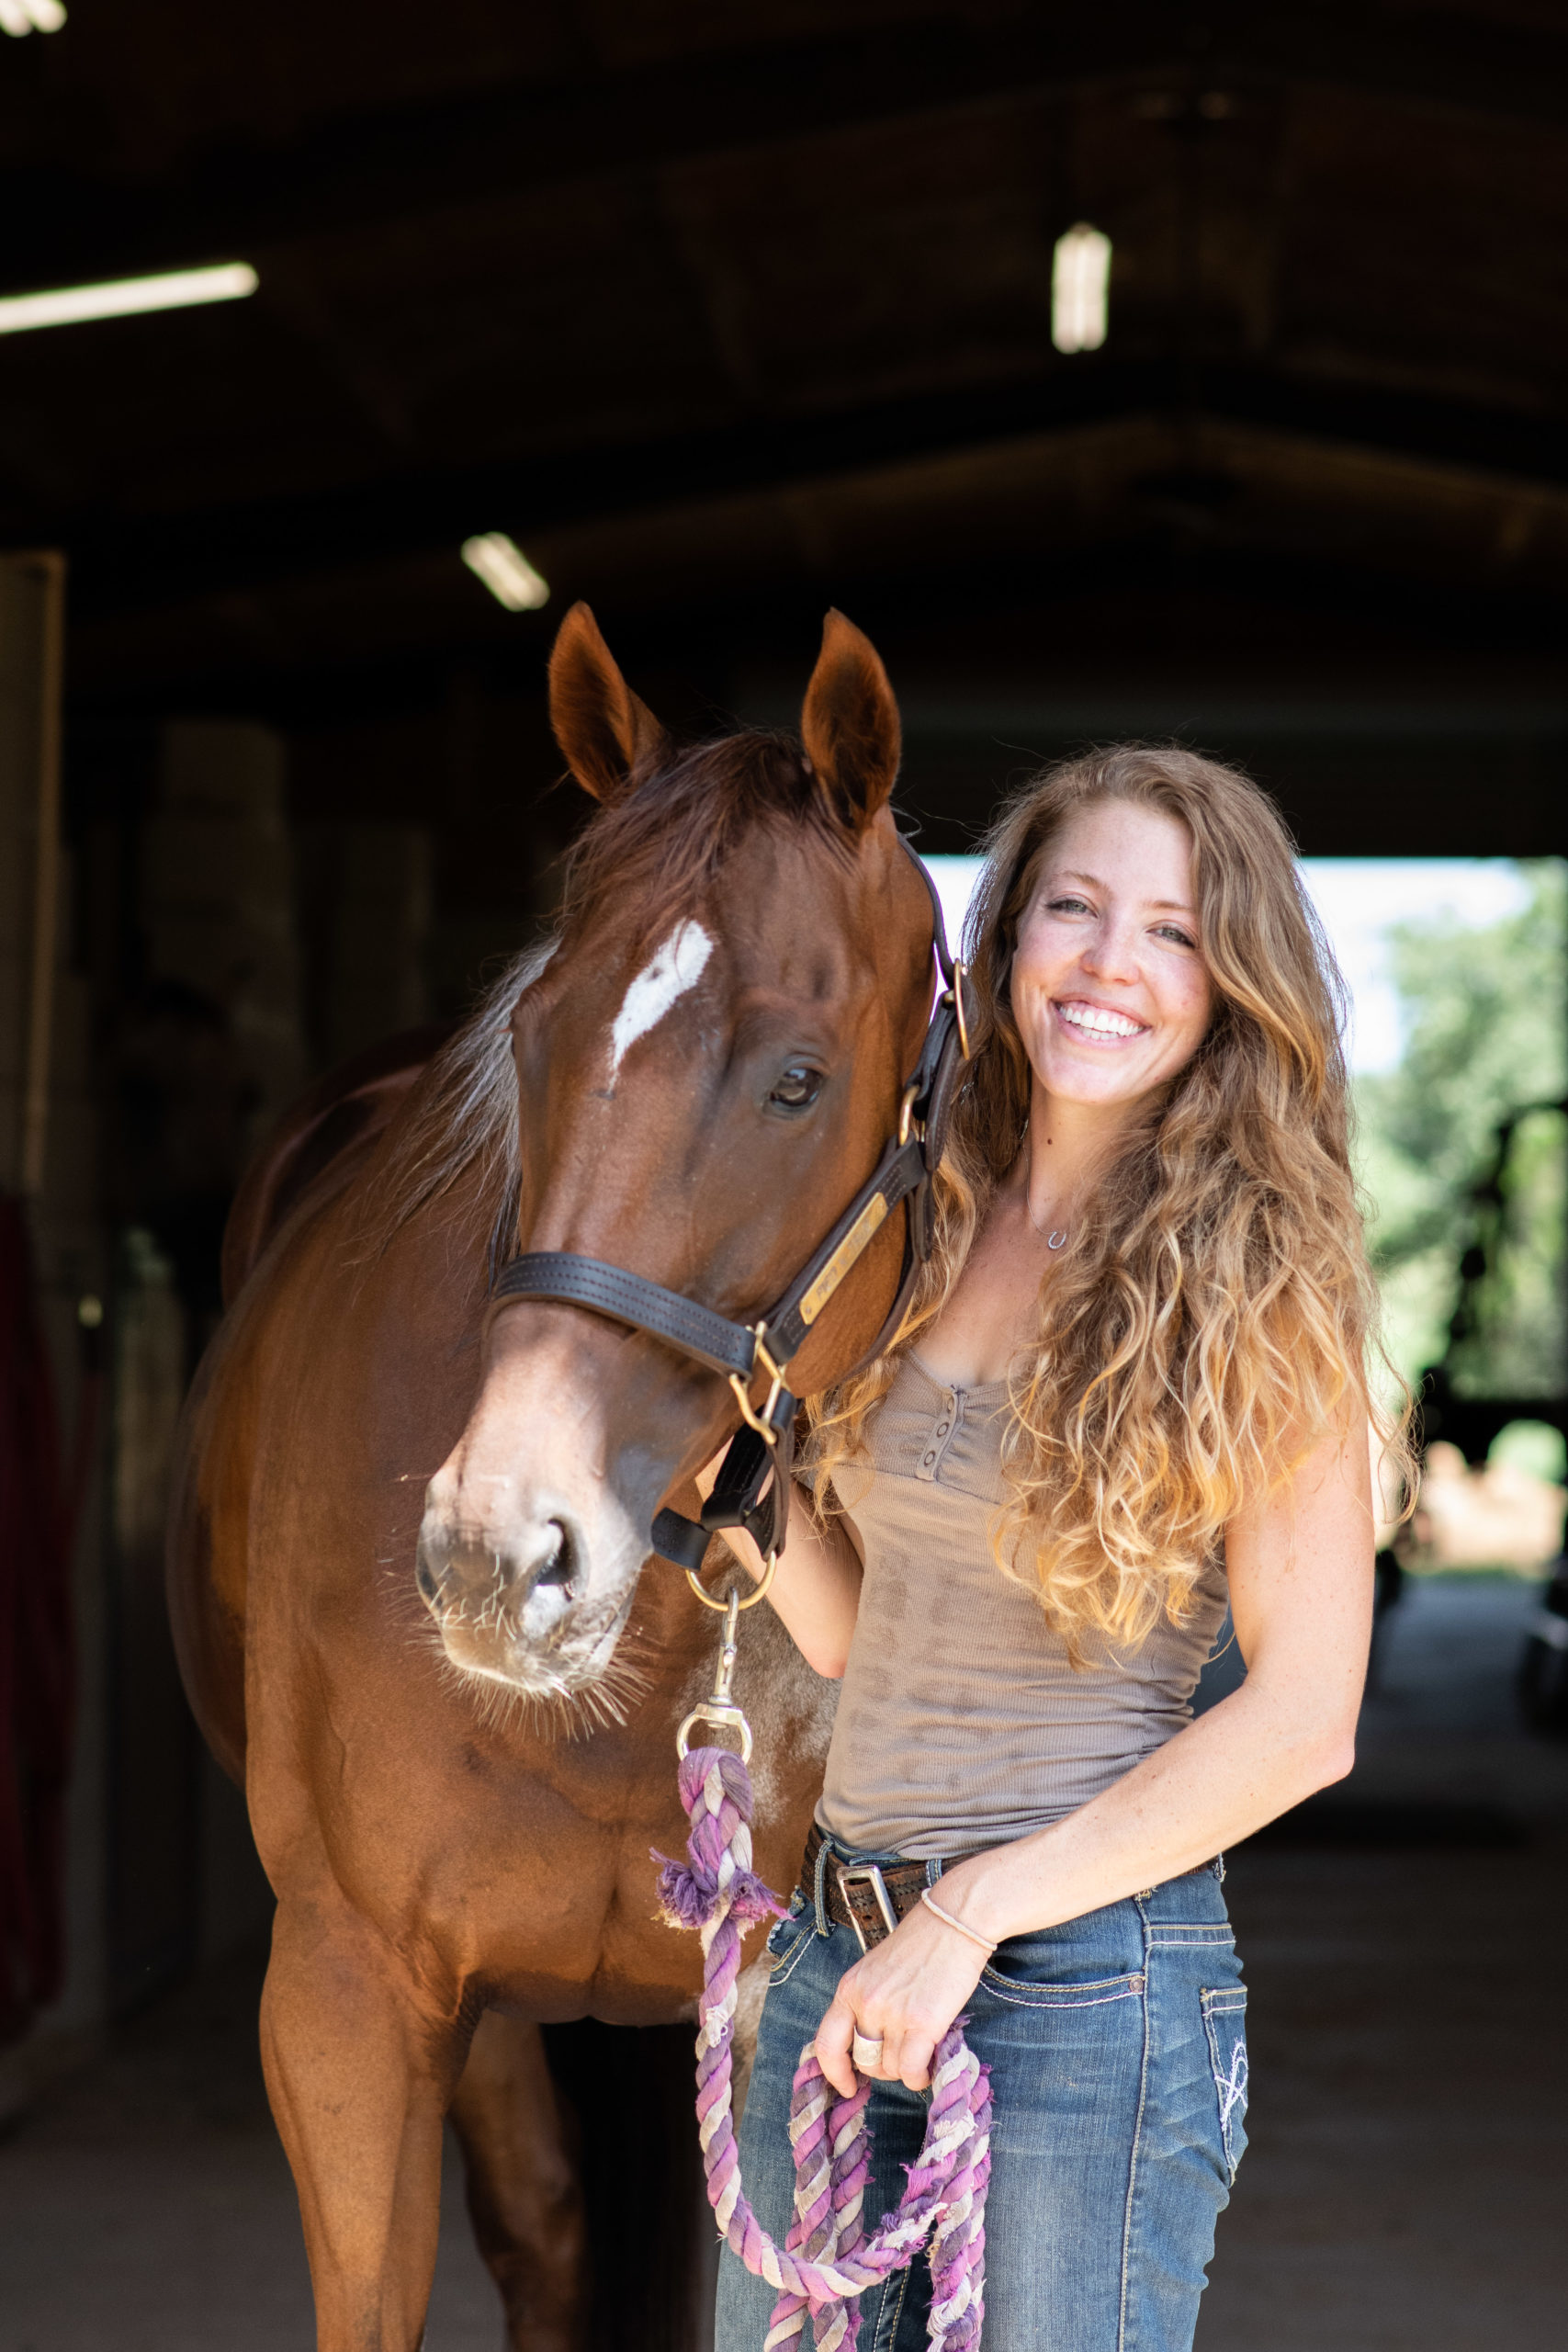 A smiling girl stands next to her sorrel horse in a barn isle